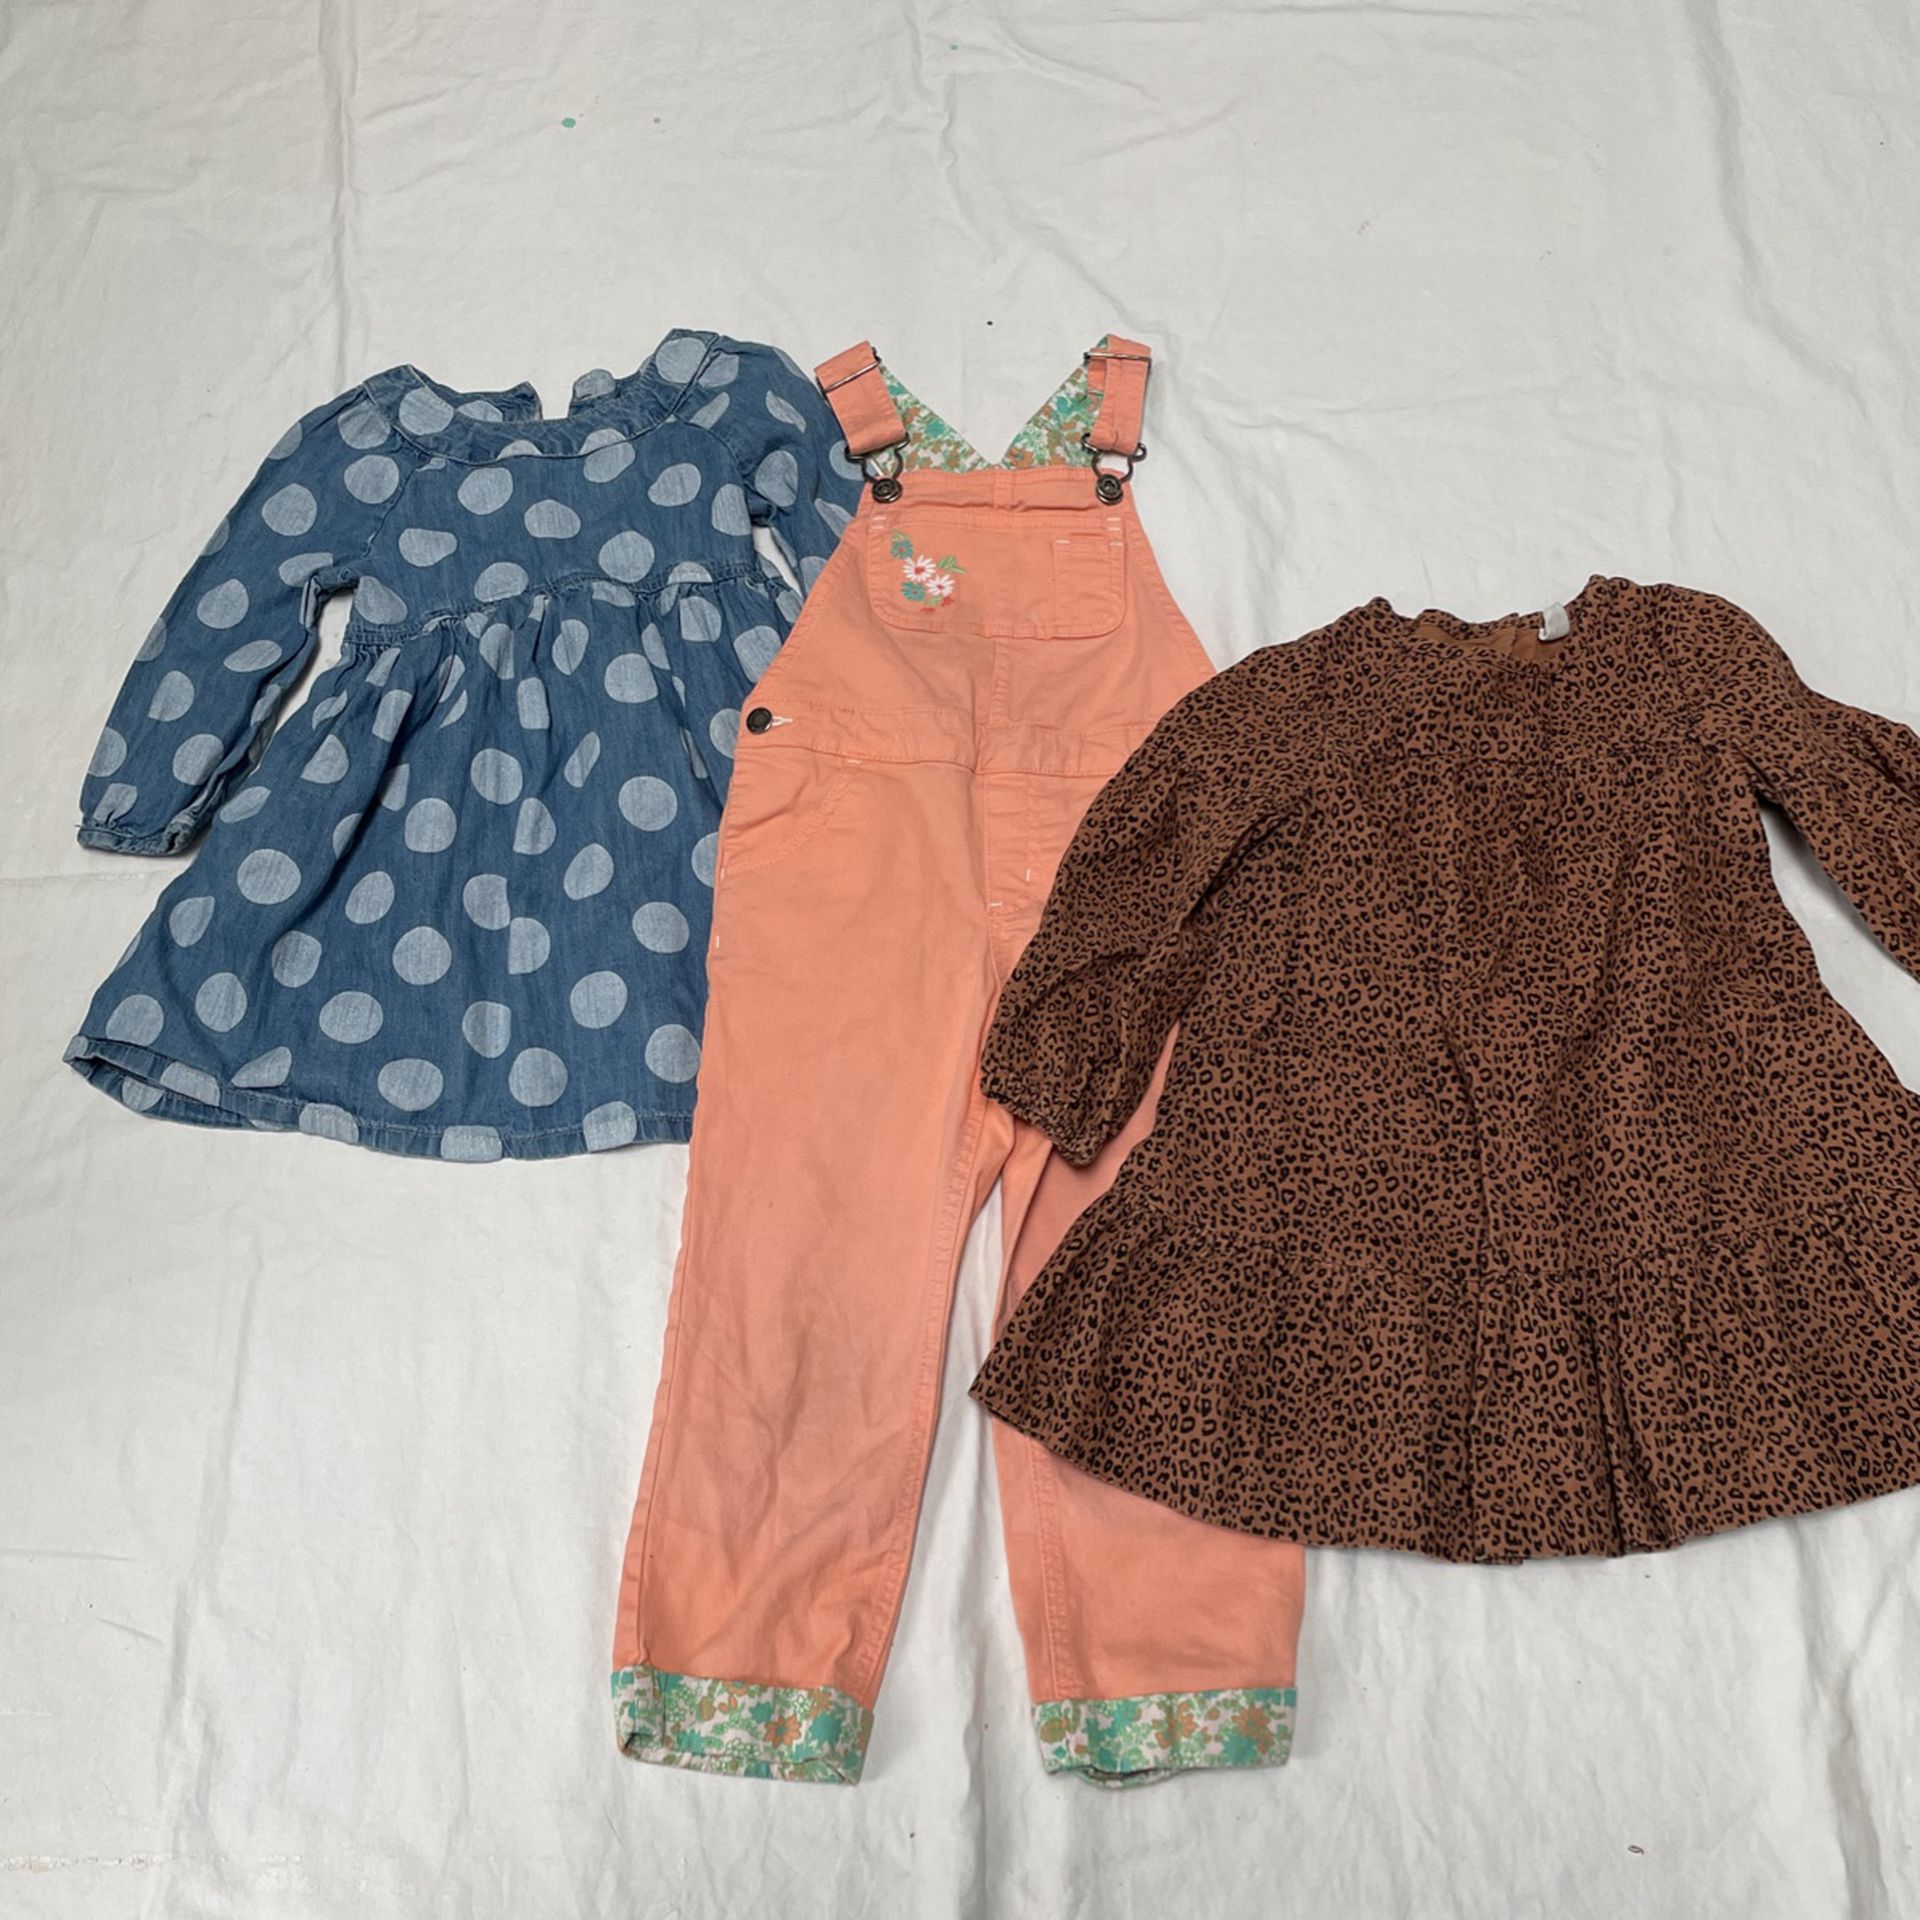 Toddler Size 3 Girl Clothes Lot